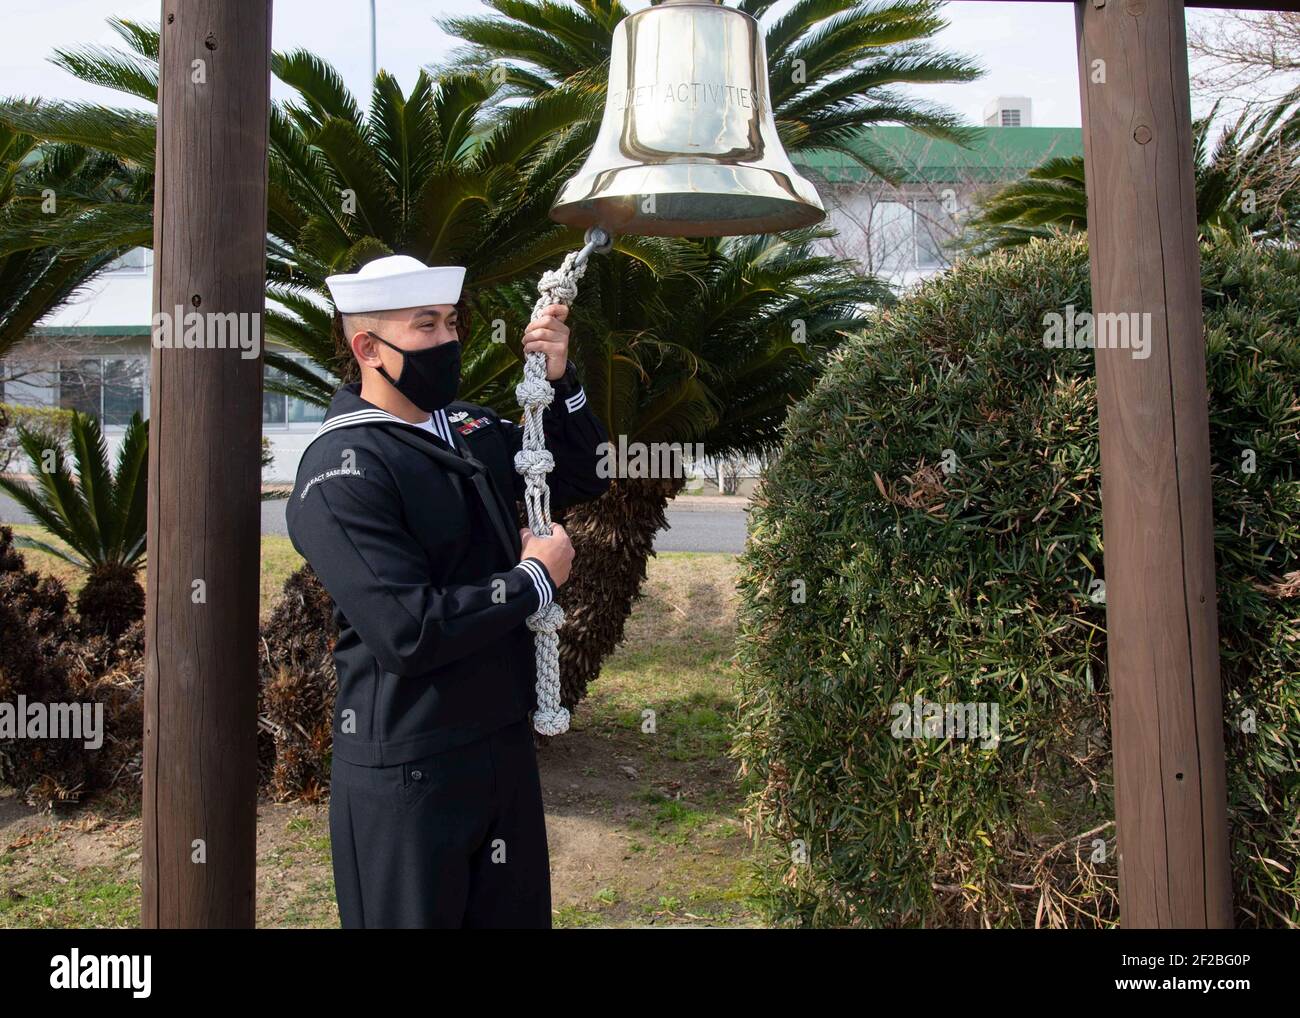 U.S. Navy sailor S1C Jonathan Ruelos, assigned to Commander, Fleet Activities Sasebo rings a bell to mark the tenth anniversary of the Great Tohoku Earthquake and Tsunami disaster March 11, 2021 in Sasebo, Japan. The earthquake and ensuing tsunami resulted in the deaths of 15,884 people across 20 prefectures in Japan. Stock Photo